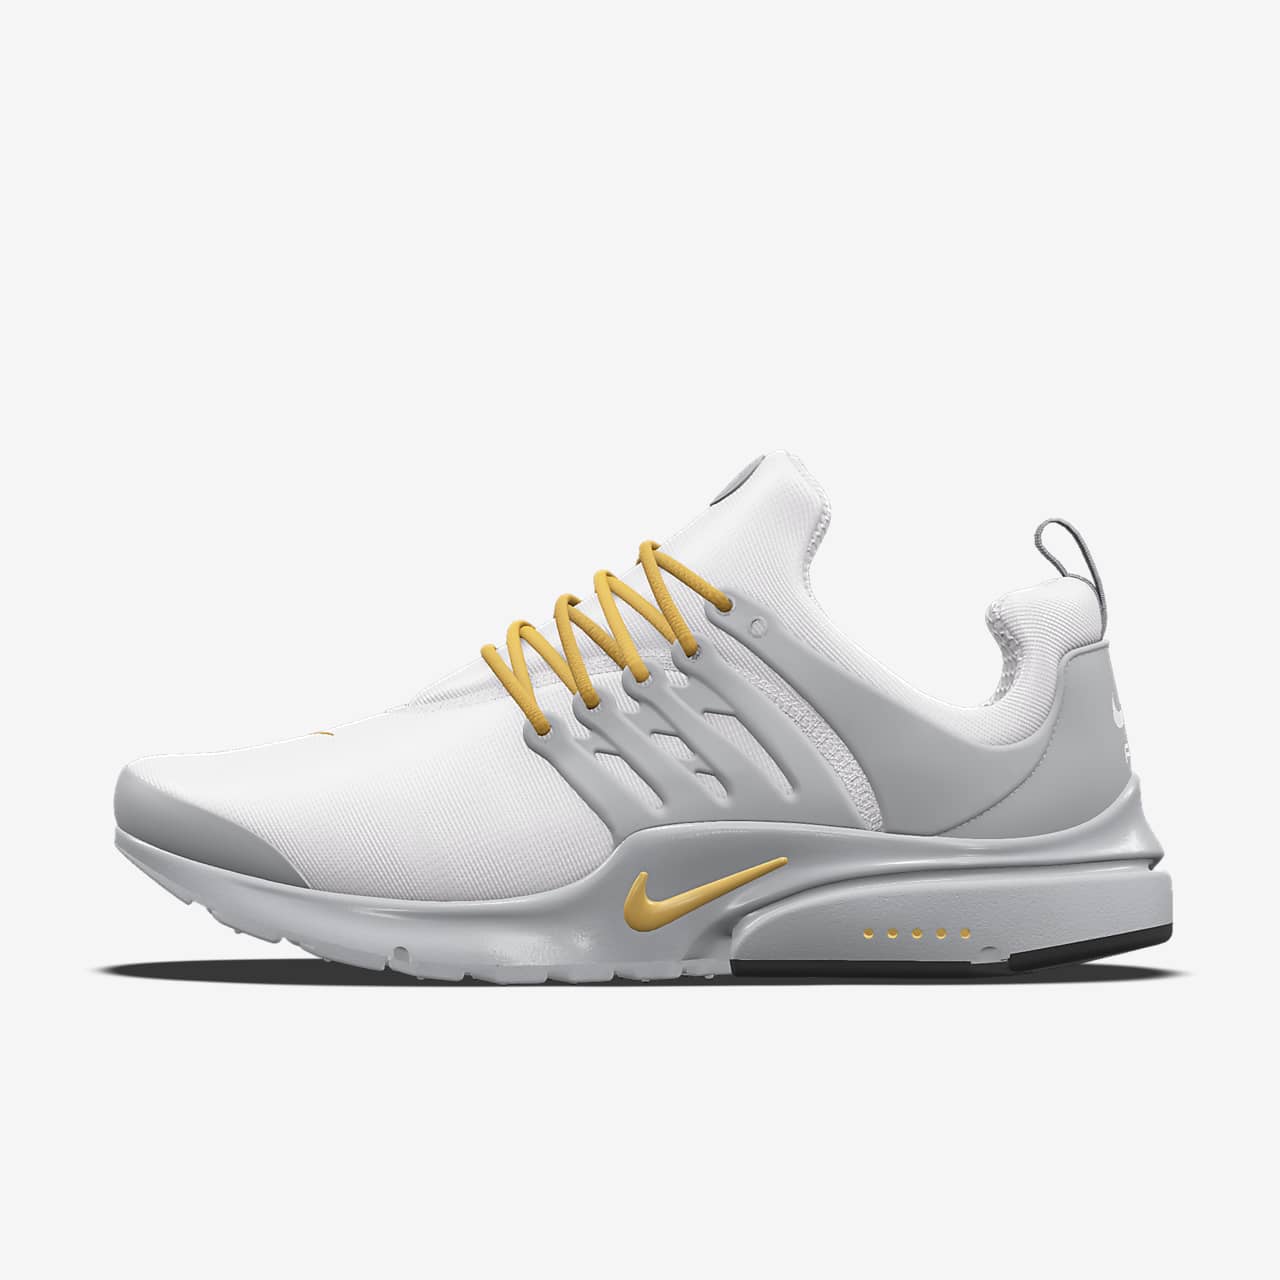 Chaussure personnalisable Nike Air Presto By You pour femme